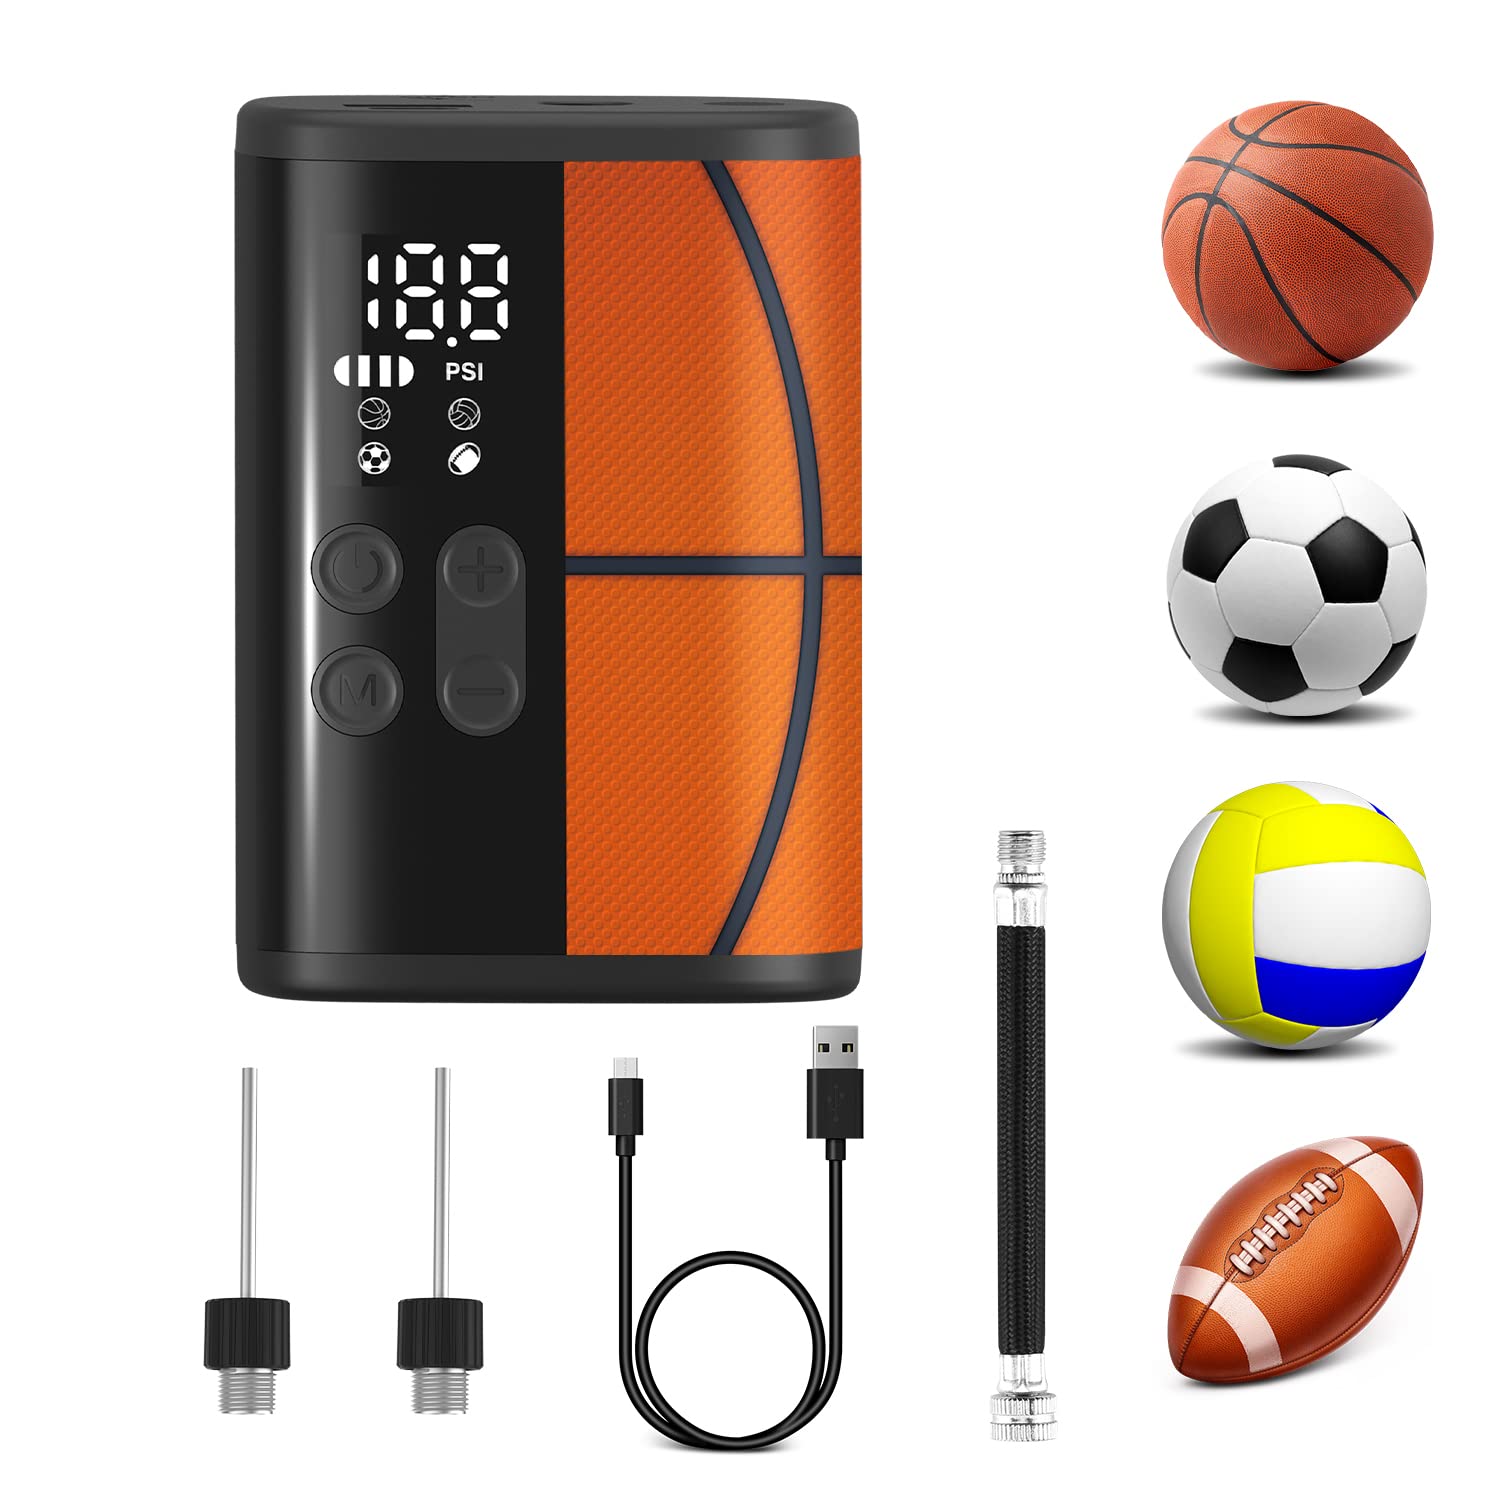 Electric Ball Pump, Smart Air Pump Portable Fast Ball Inflation with  Precise Pressure Gauge and Digital LCD Display for Football Basketball  Volleyball